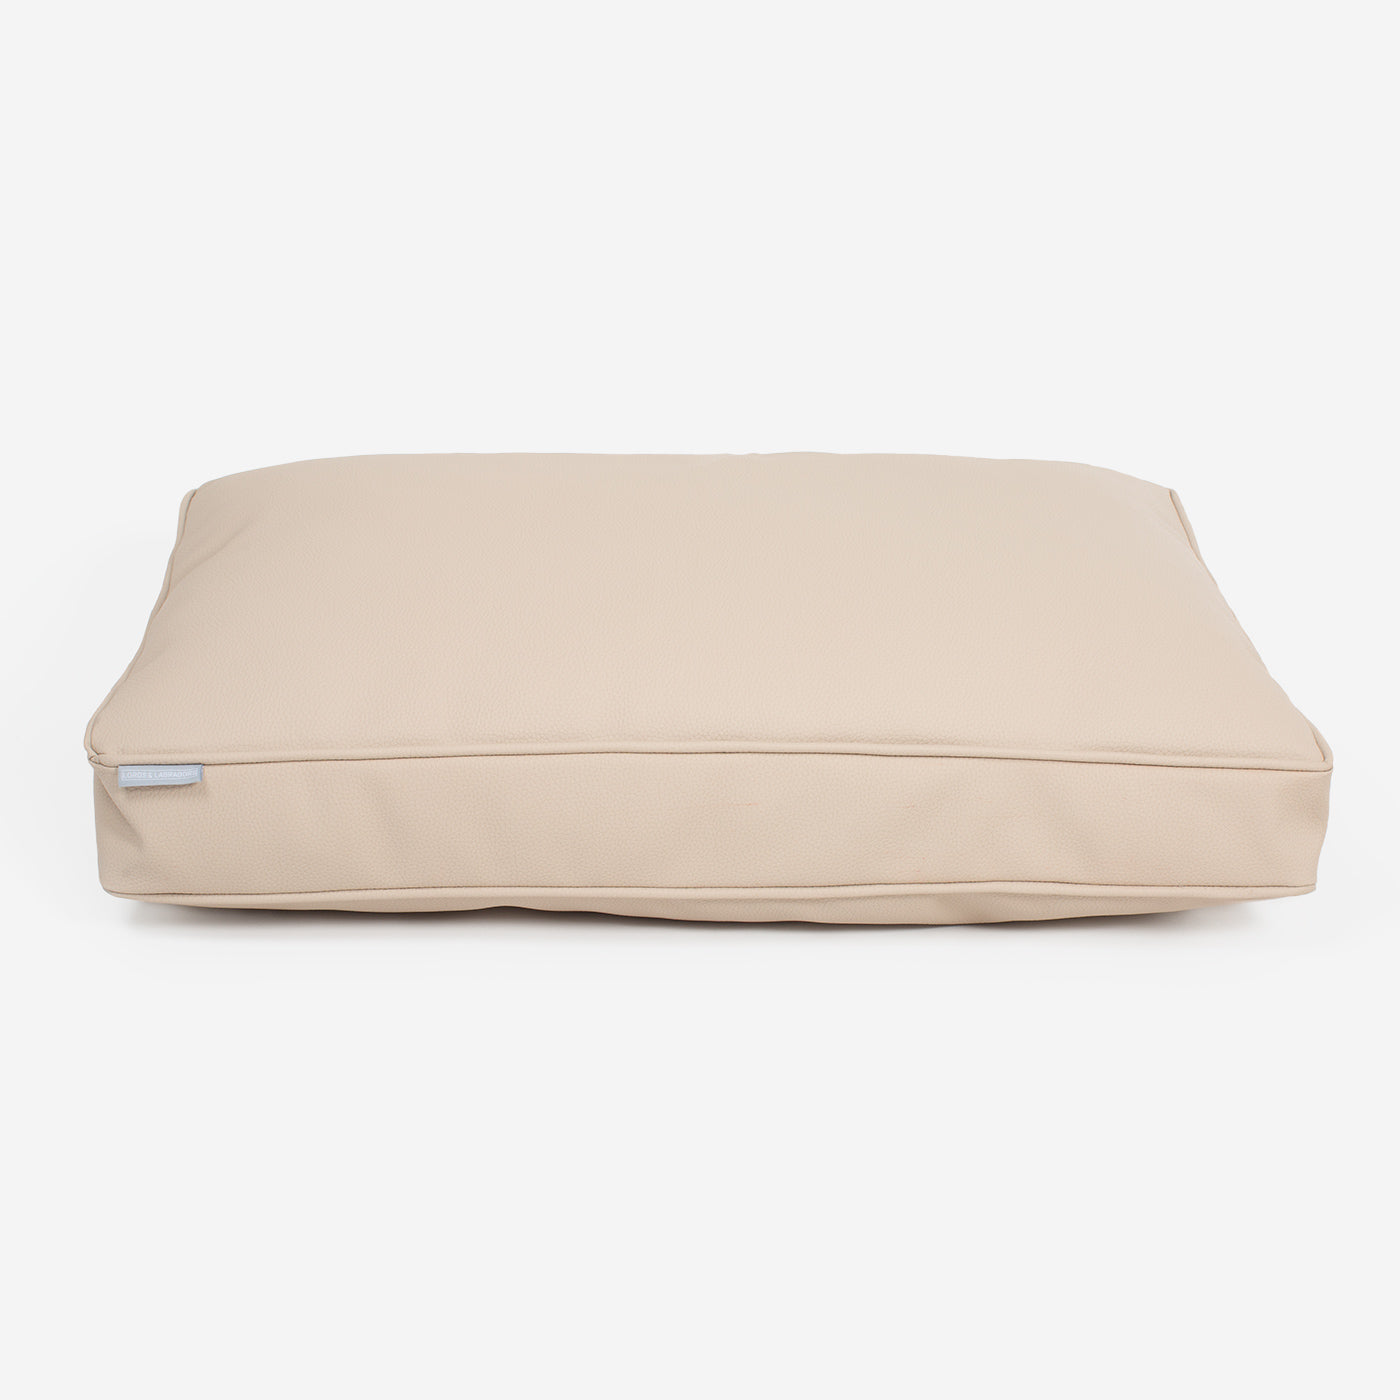 [color:sand] Luxury Dog Cushion in Rhino Tough Faux Leather in Sand, The Perfect Pet Bed Time Accessory! Available Now at Lords & Labradors